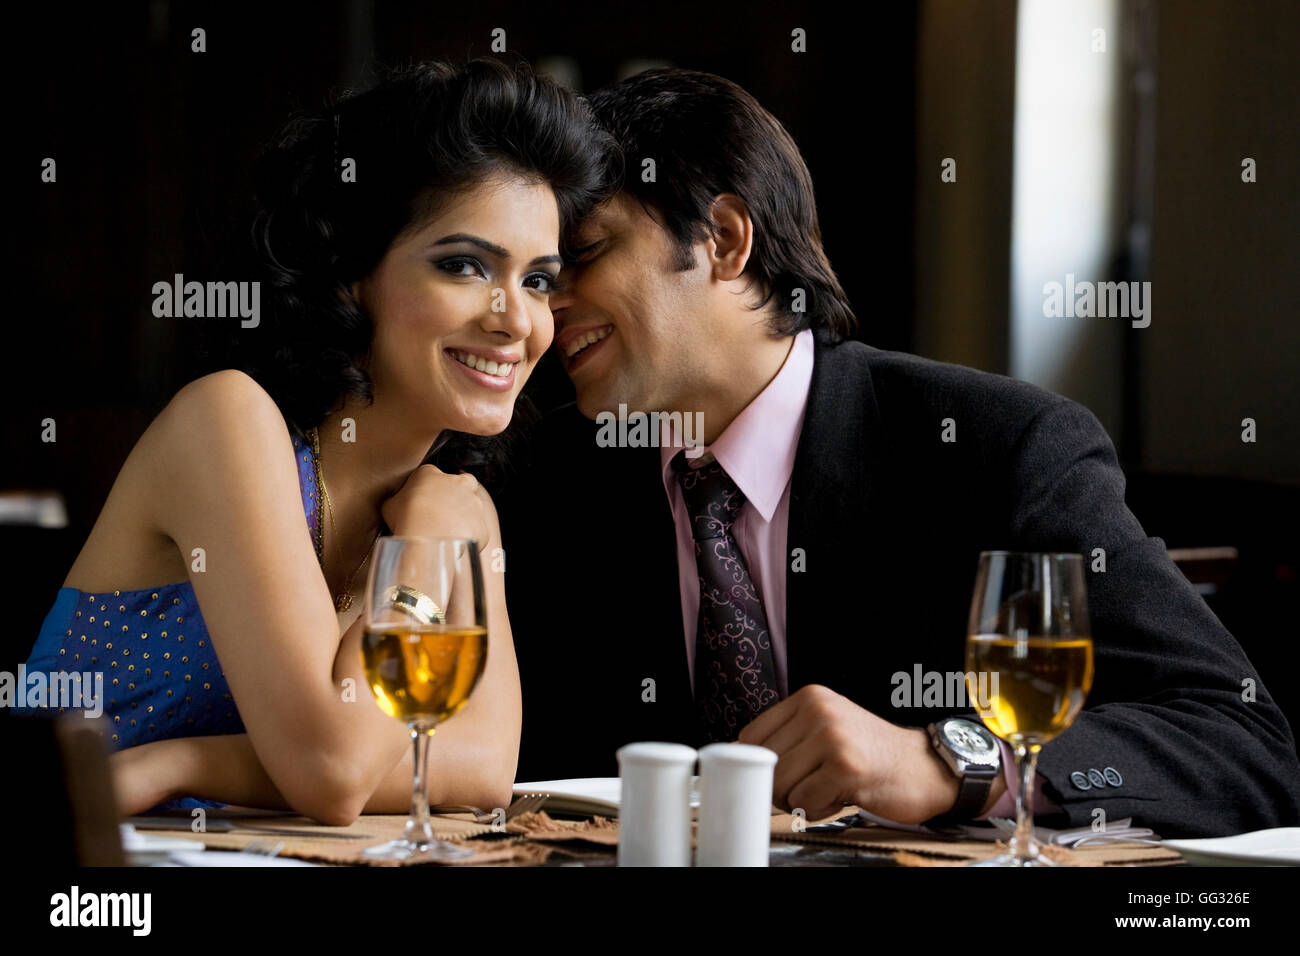 Couple dining together Stock Photo